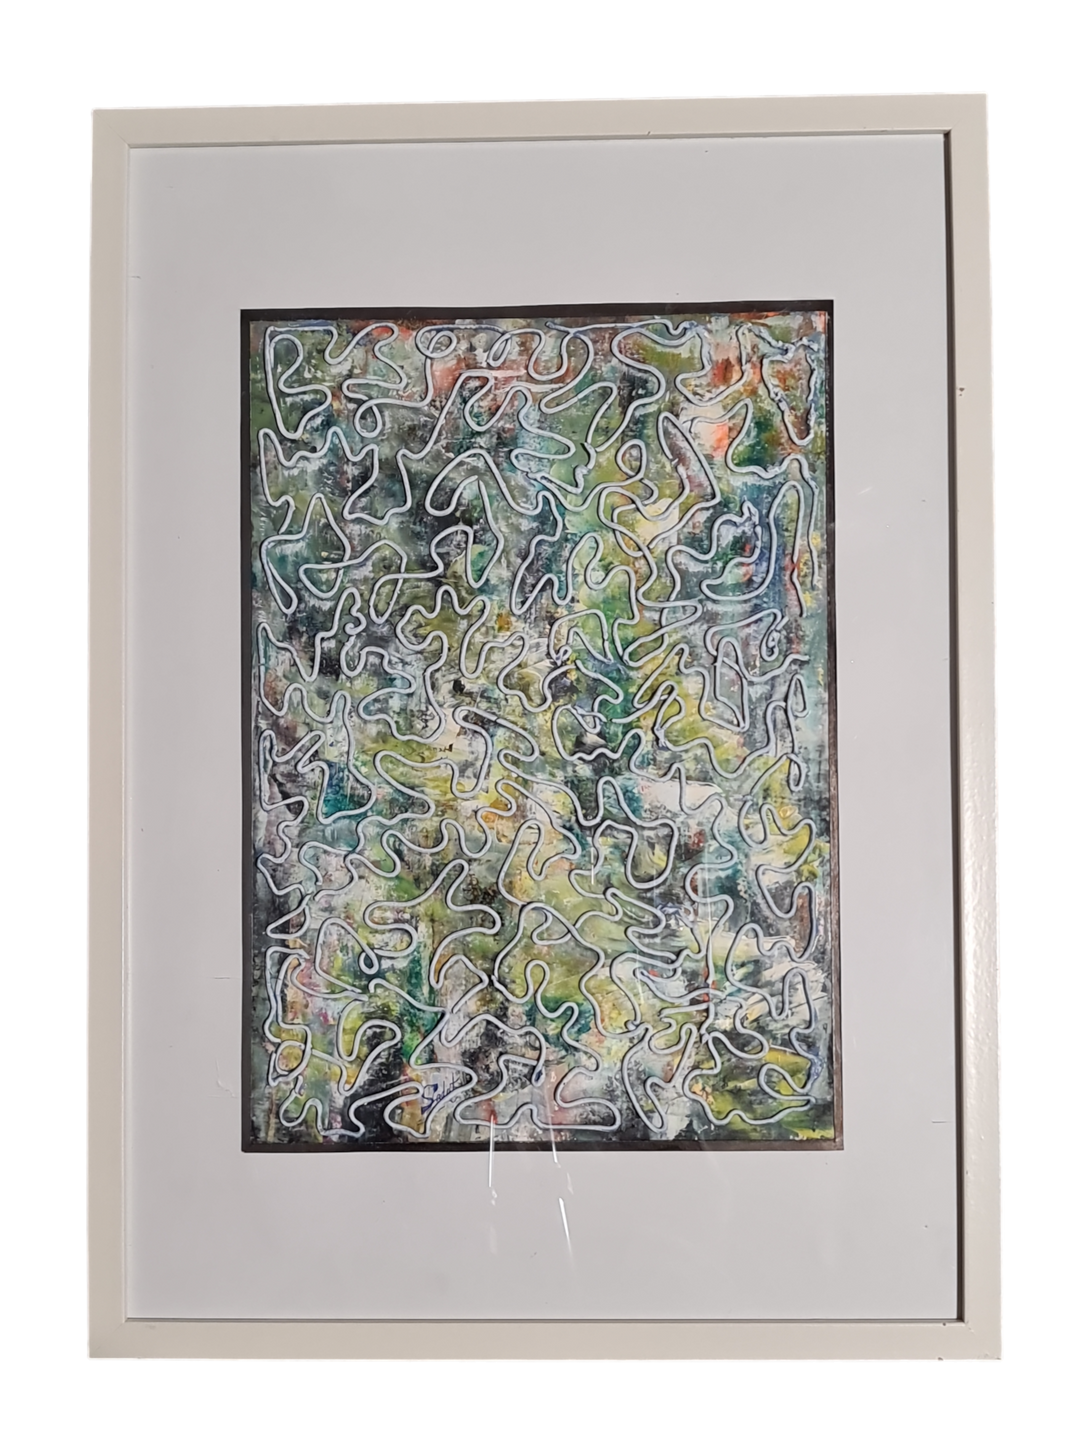 Textured Abstract Painting: Green, Blue, Grey, Easy to Hang